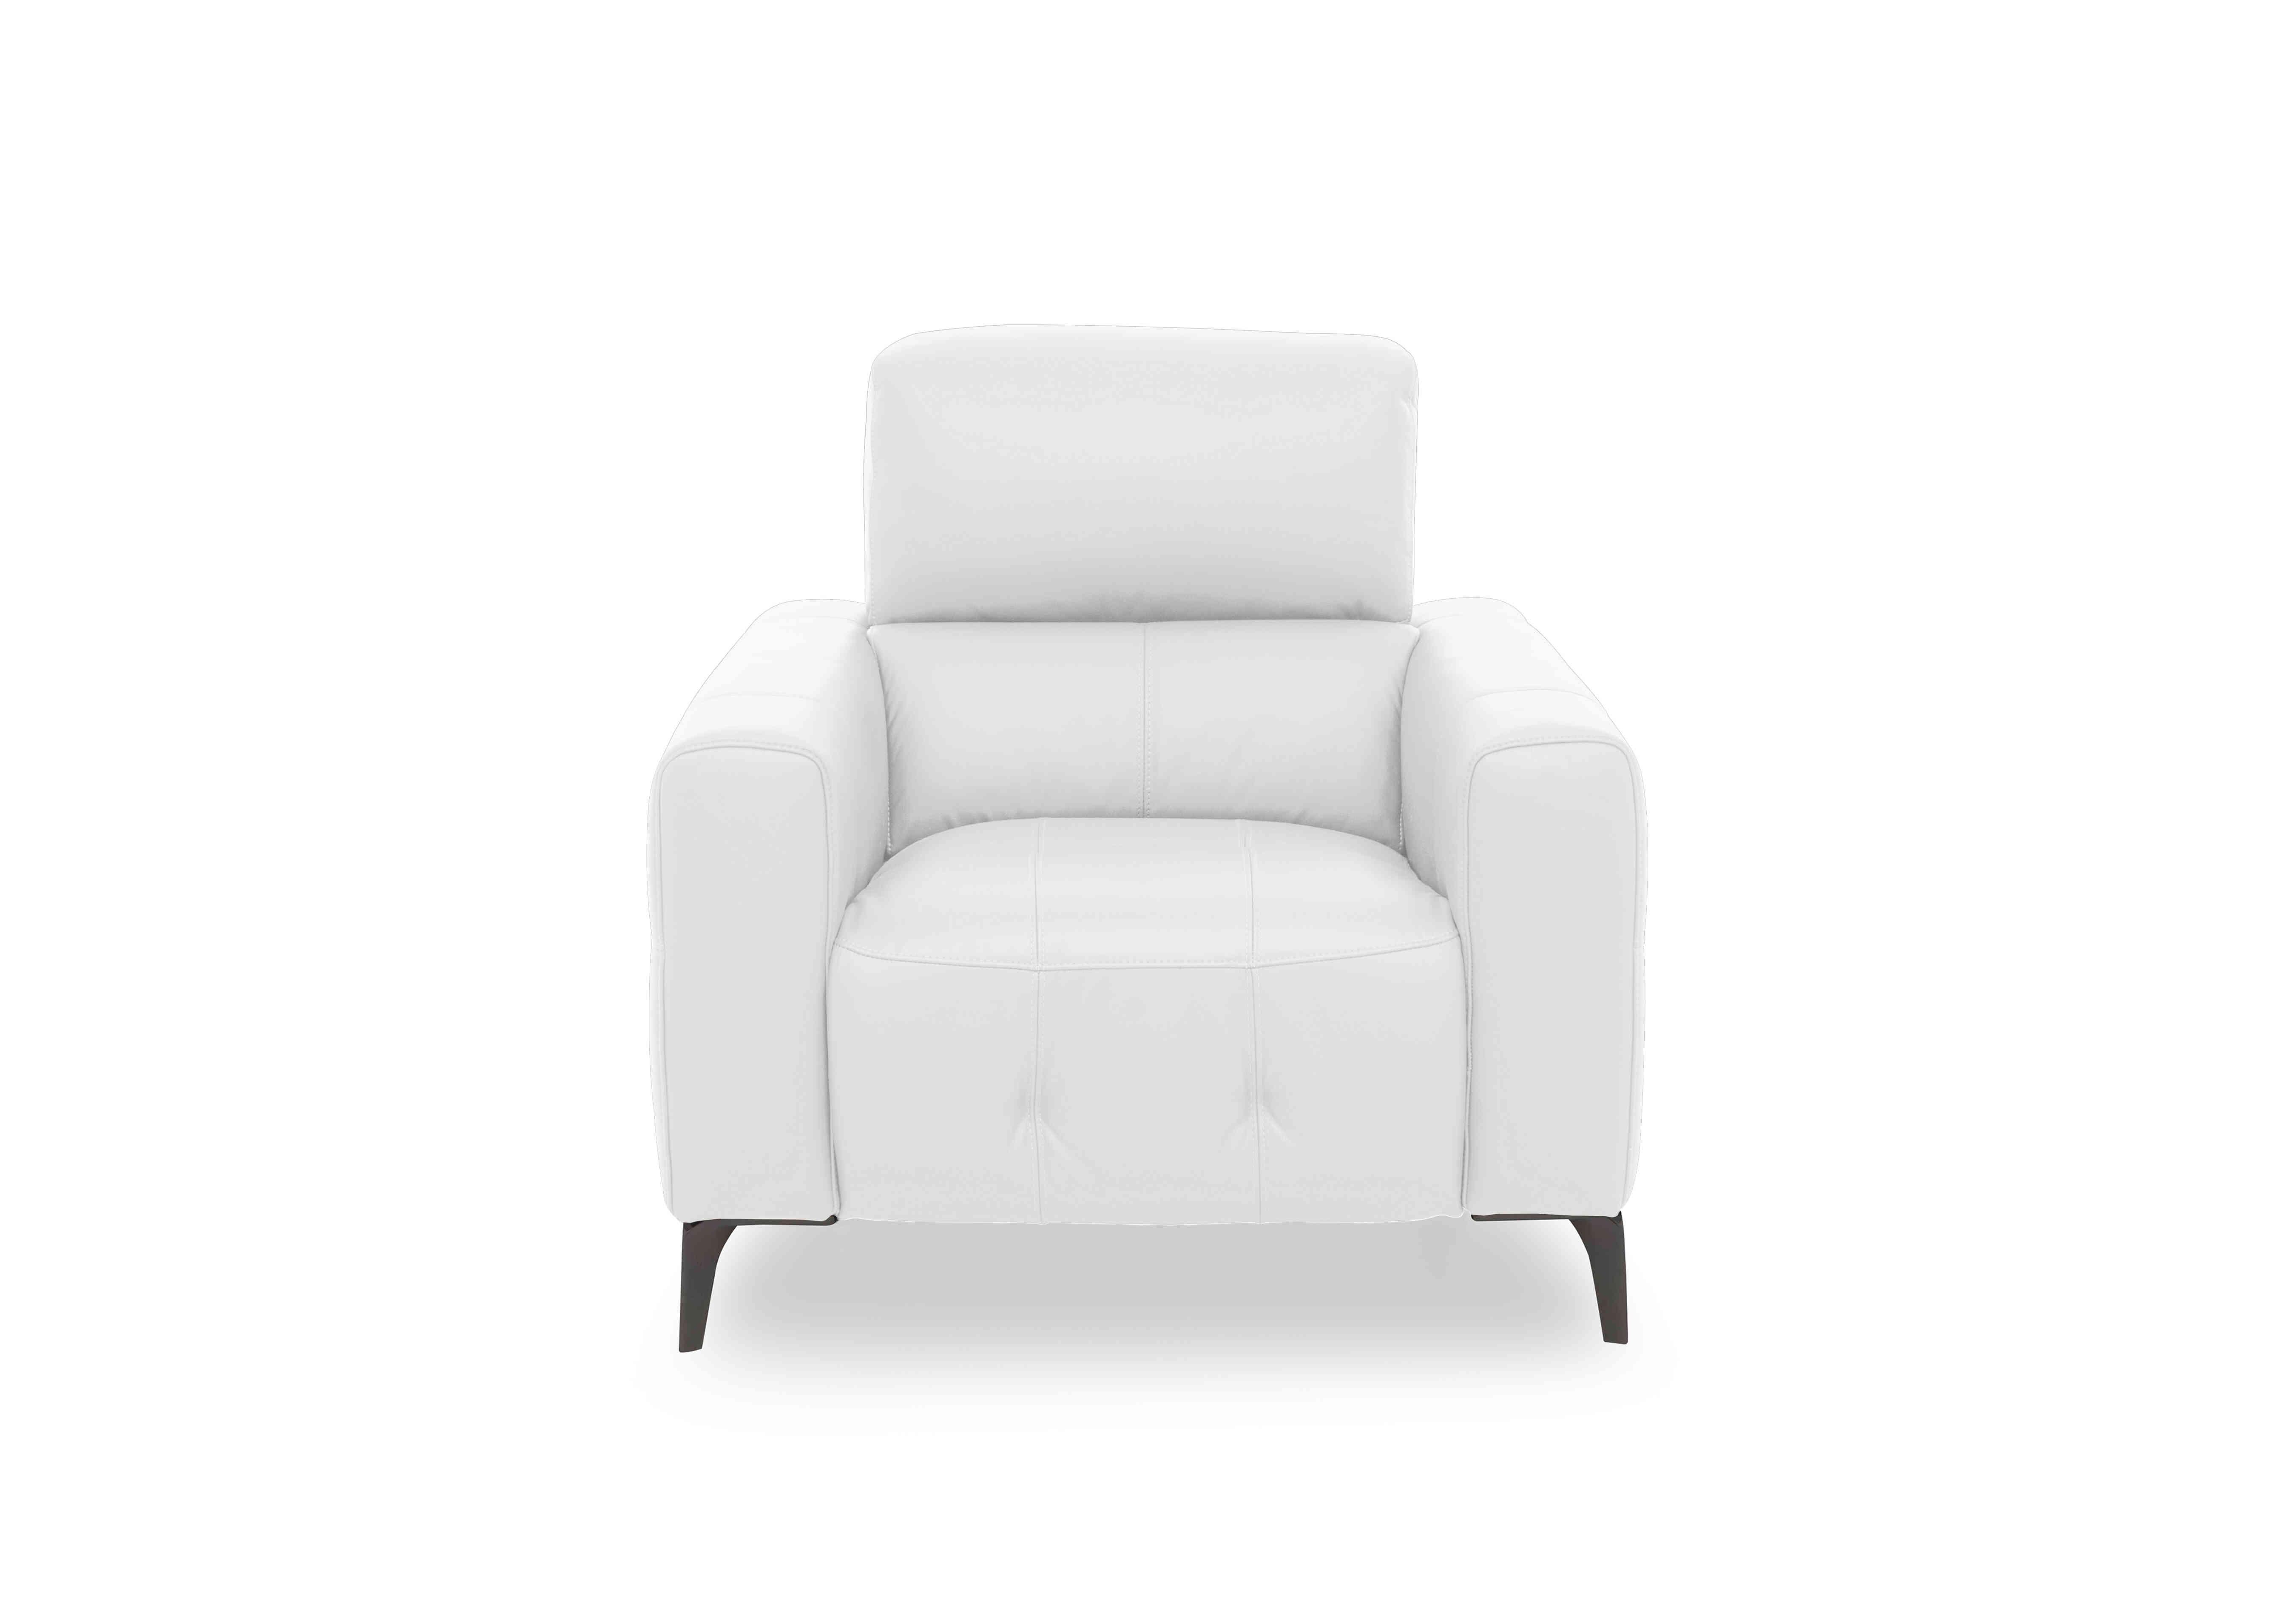 New York Leather Chair in Bv-744d Star White on Furniture Village